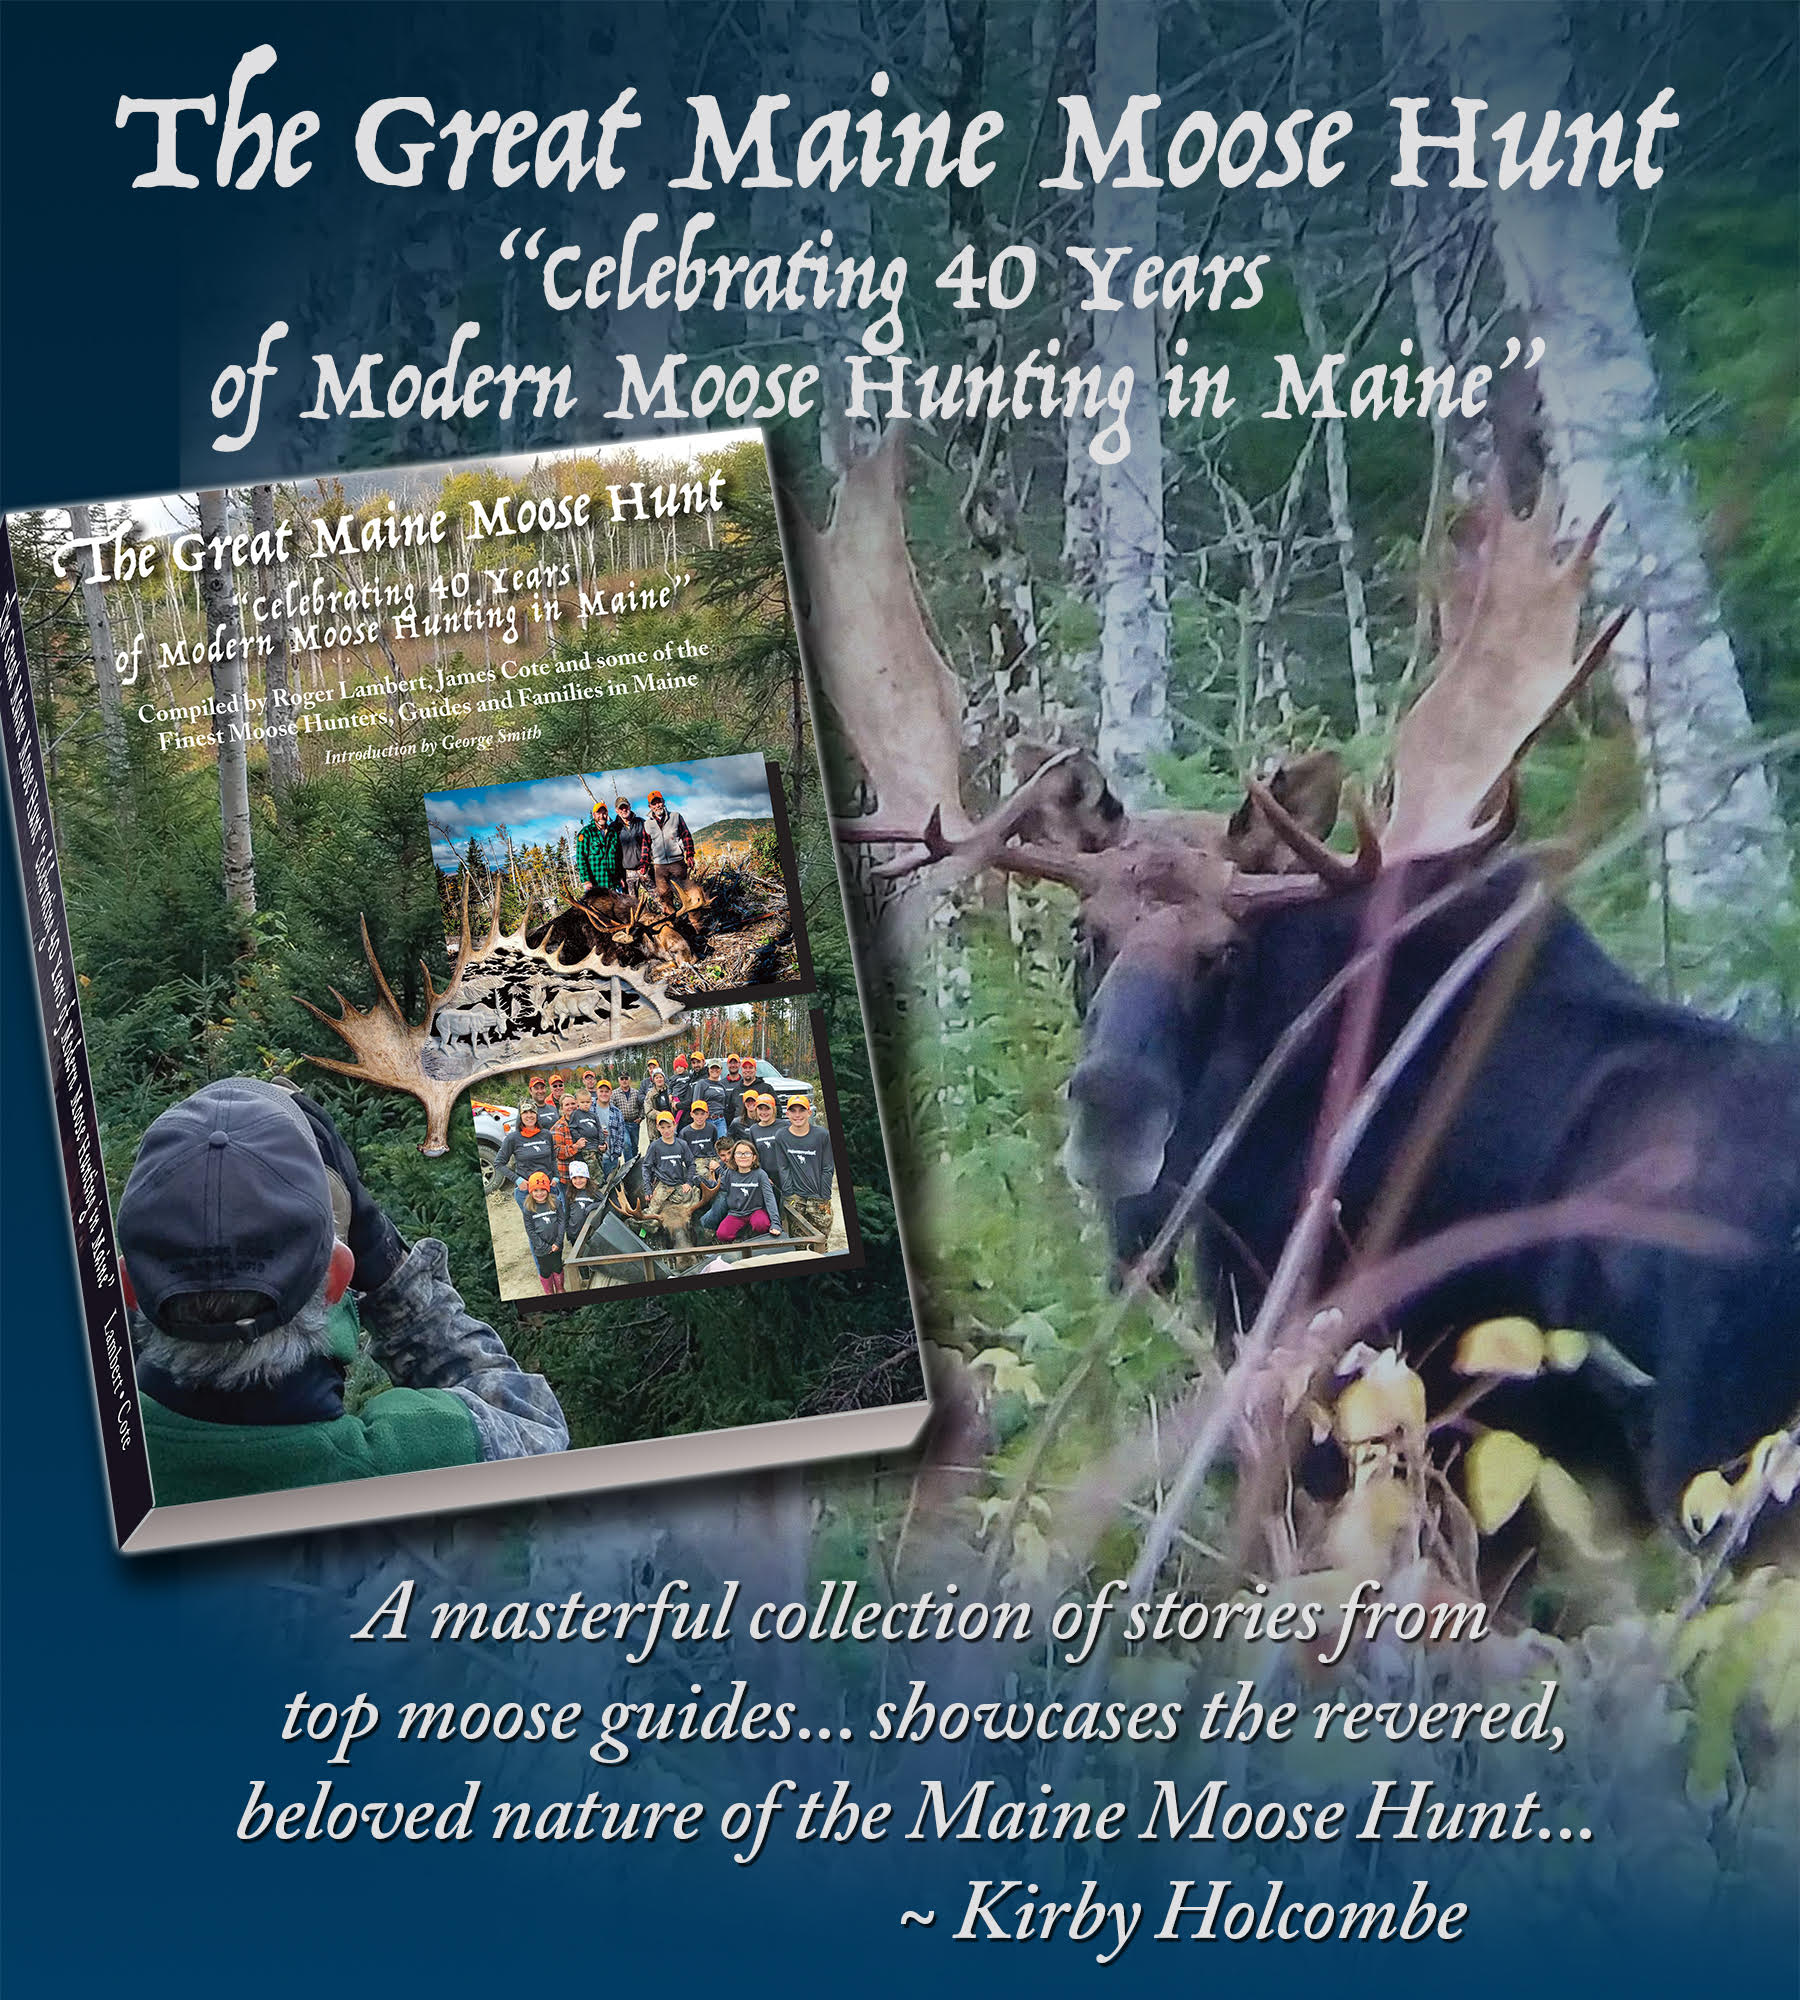 The Great Maine Moose Hunt